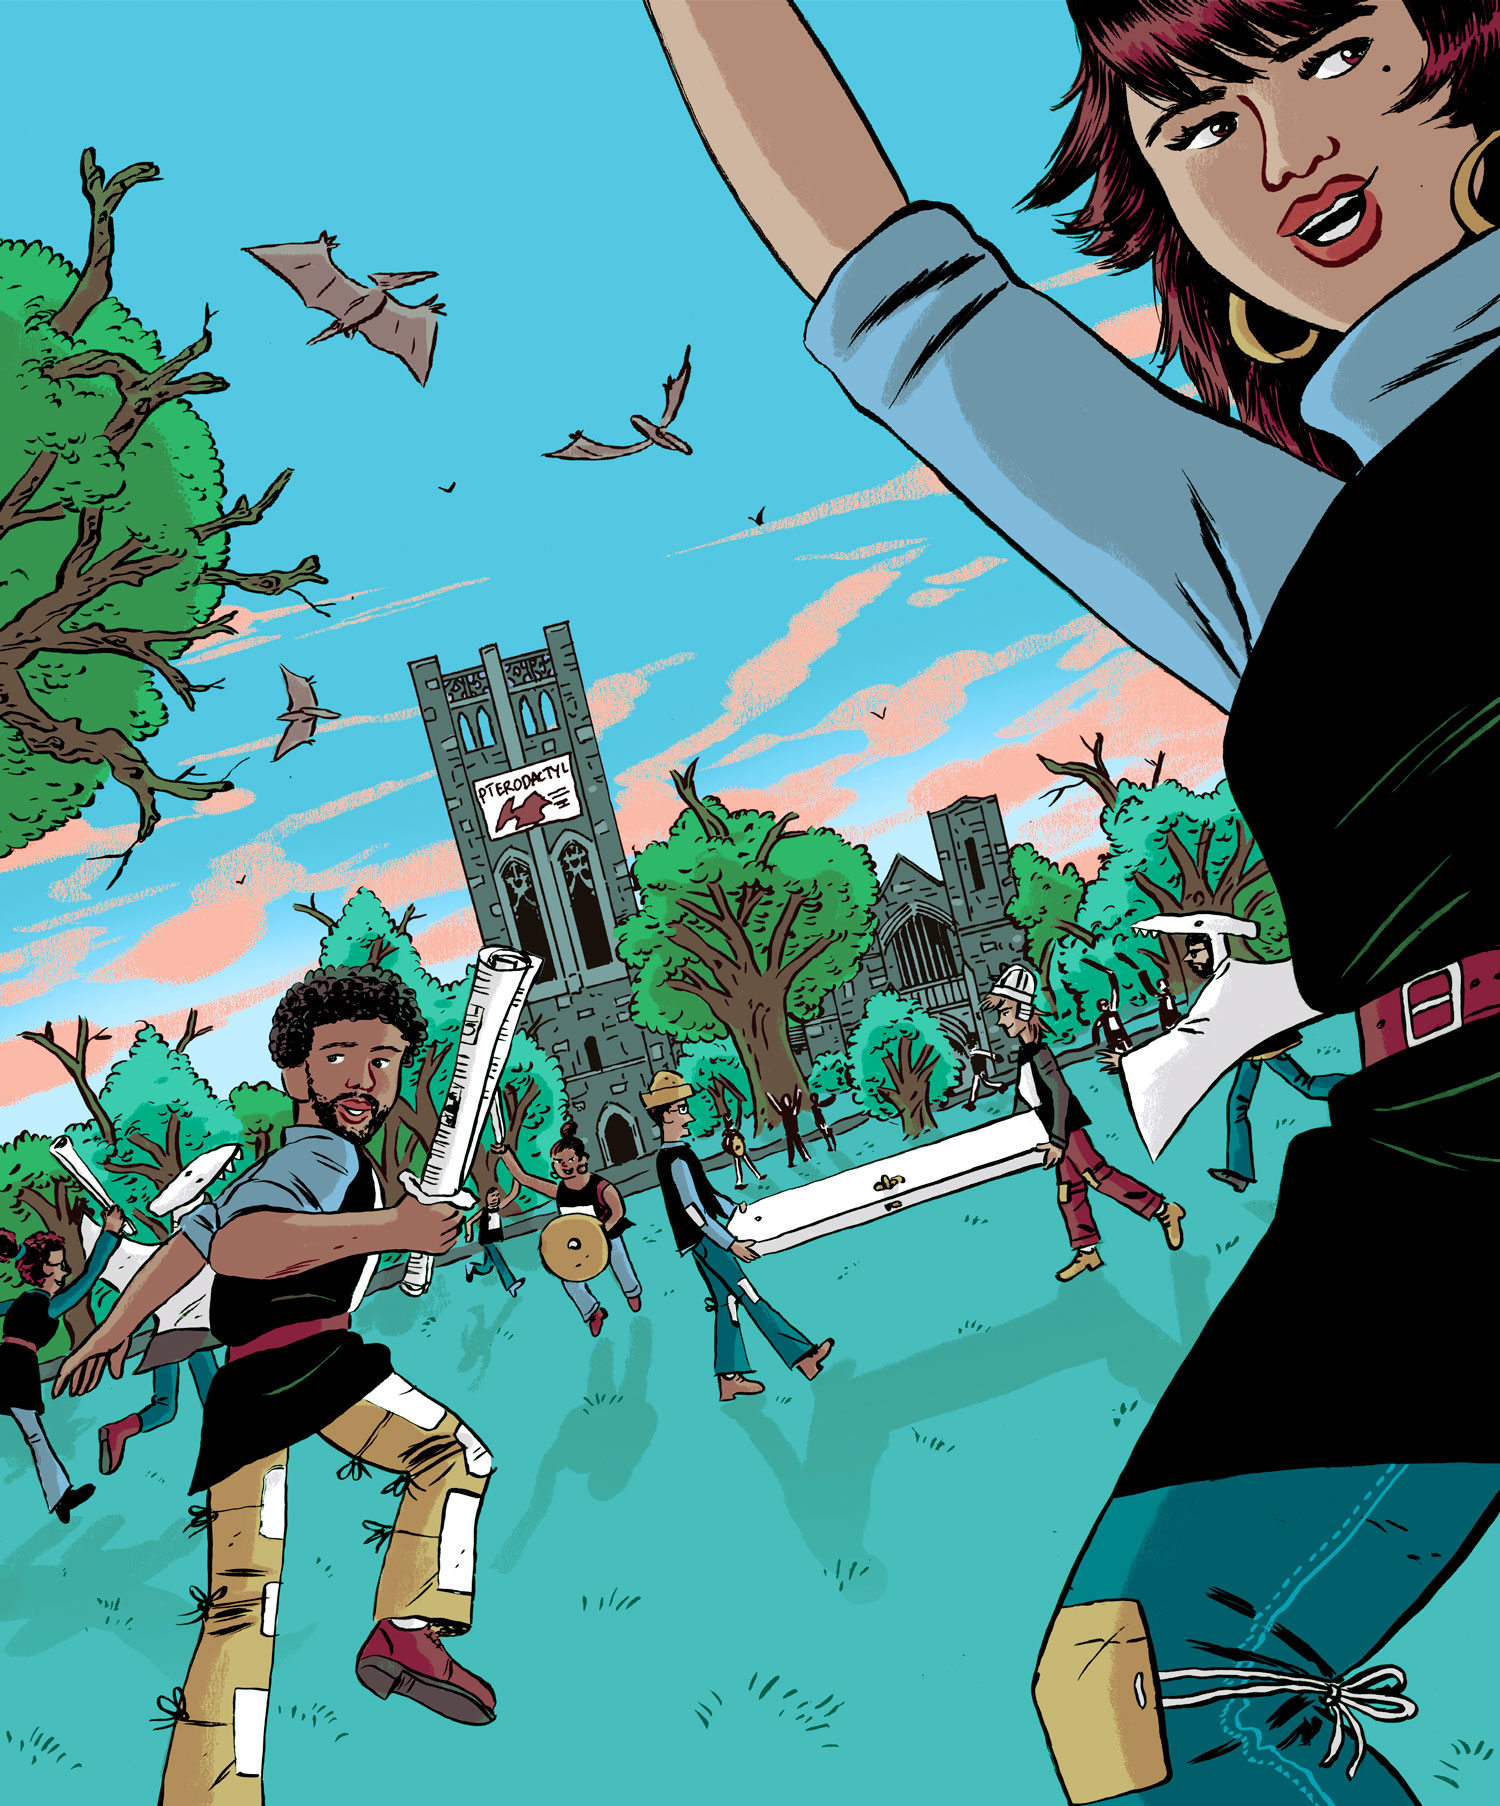 A comic-book-style illustration of Swarthmore’s campus, with students running around carrying fake swords and wearing black trashbags. Another student is dressed as a white pterodactly. Pterodactyls also swarm overhead. On Clothier Tower is a “Pterodactyl” sign. Amid the chaos are two students carrying a white door.